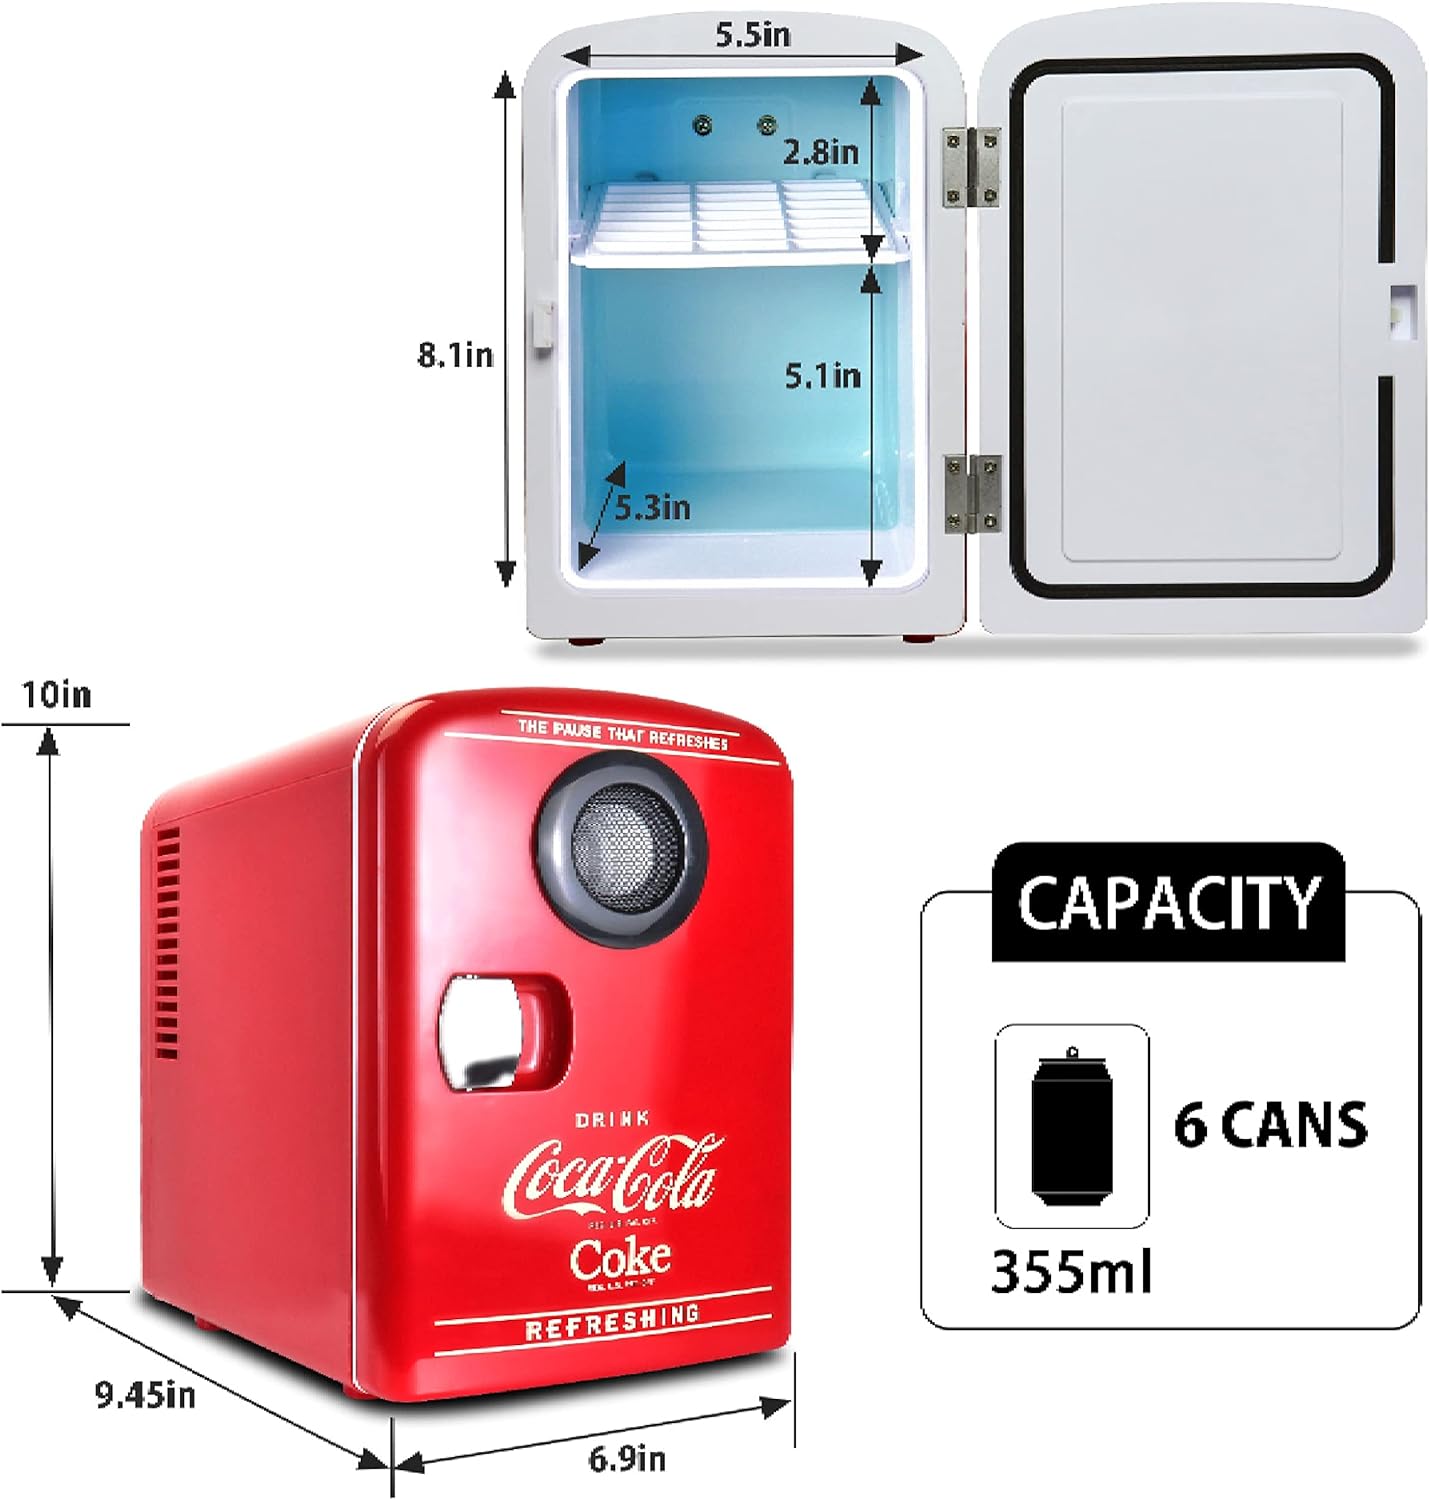 Coca Cola 4L Portable Mini Fridge Cooler/Warmer with Bluetooth Speaker, Compact Personal Refrigerator with Built-In Wireless Speaker,12V and AC Cords, Cute Desk Accessory for Home Office Dorm, Red [Energy Class A]